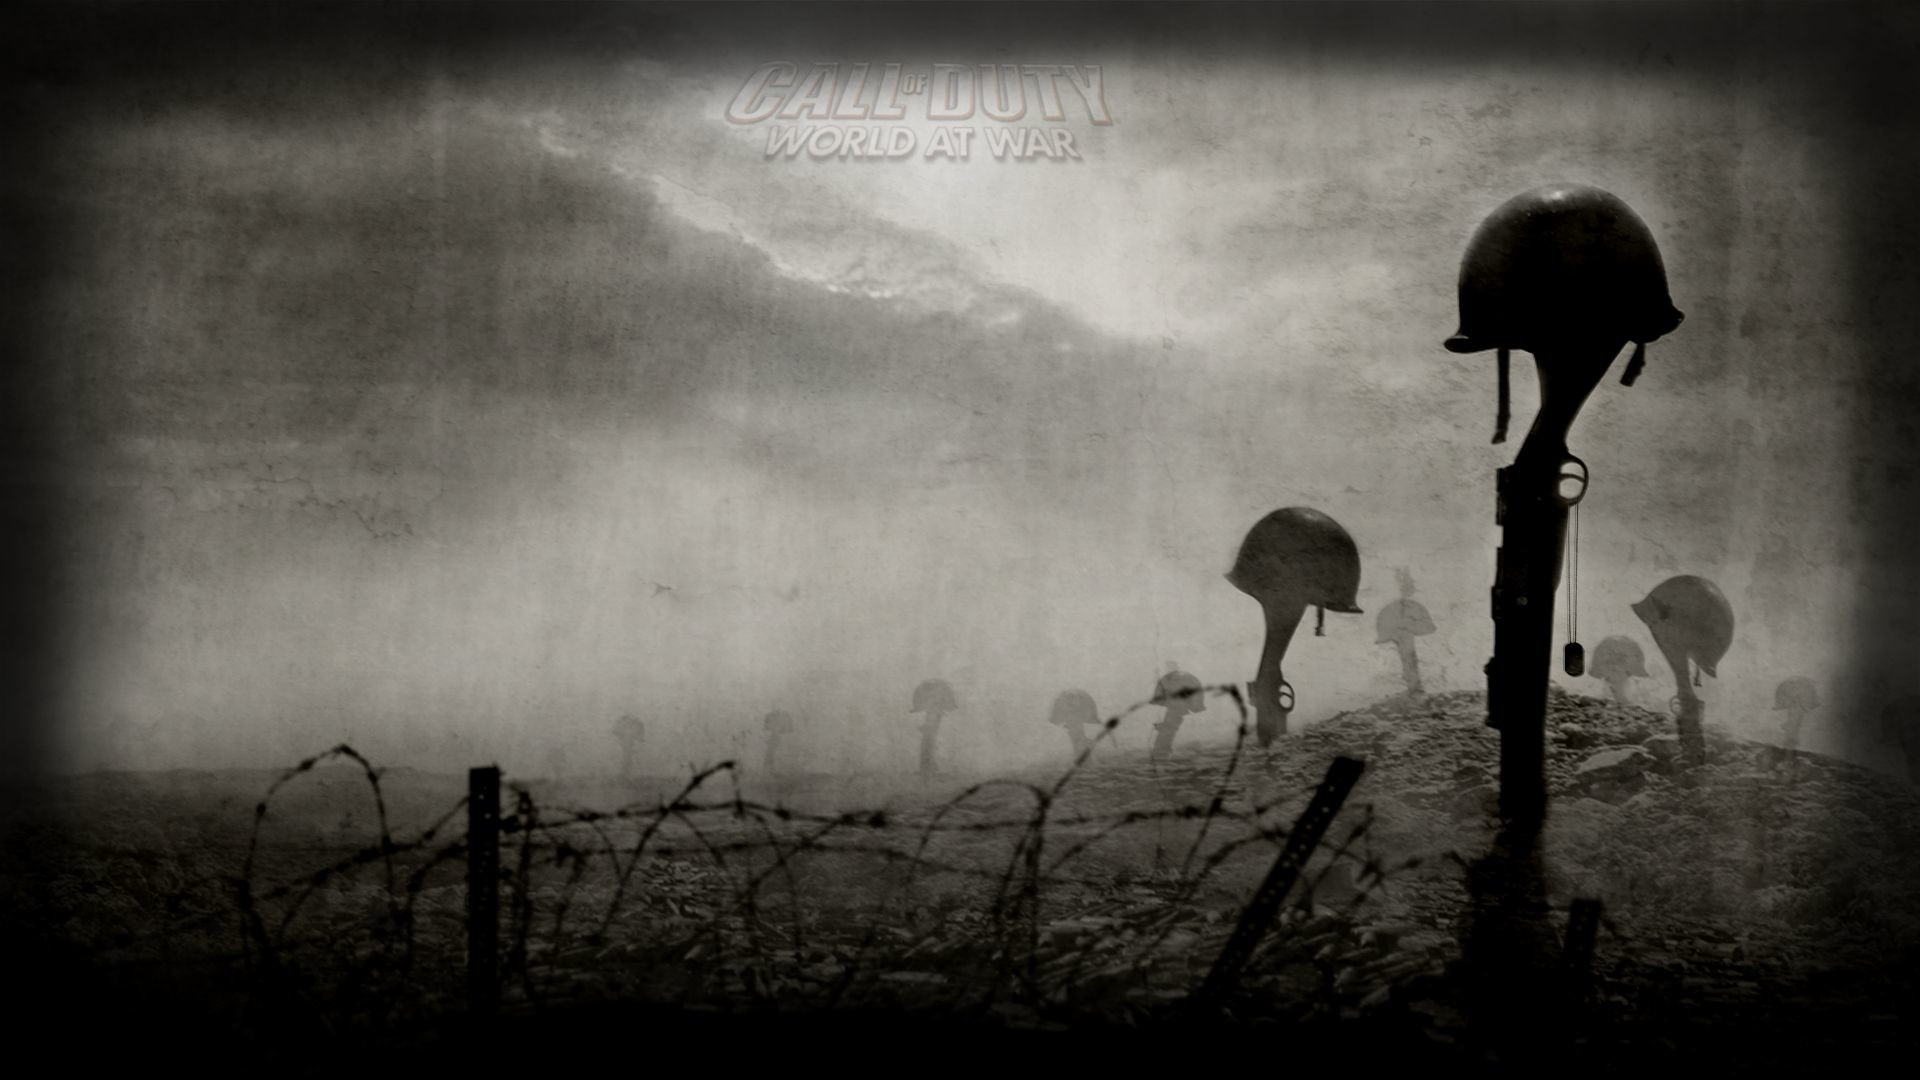 1920x1080 world at war hd wallpapers free download awesome desktop backgrounds .